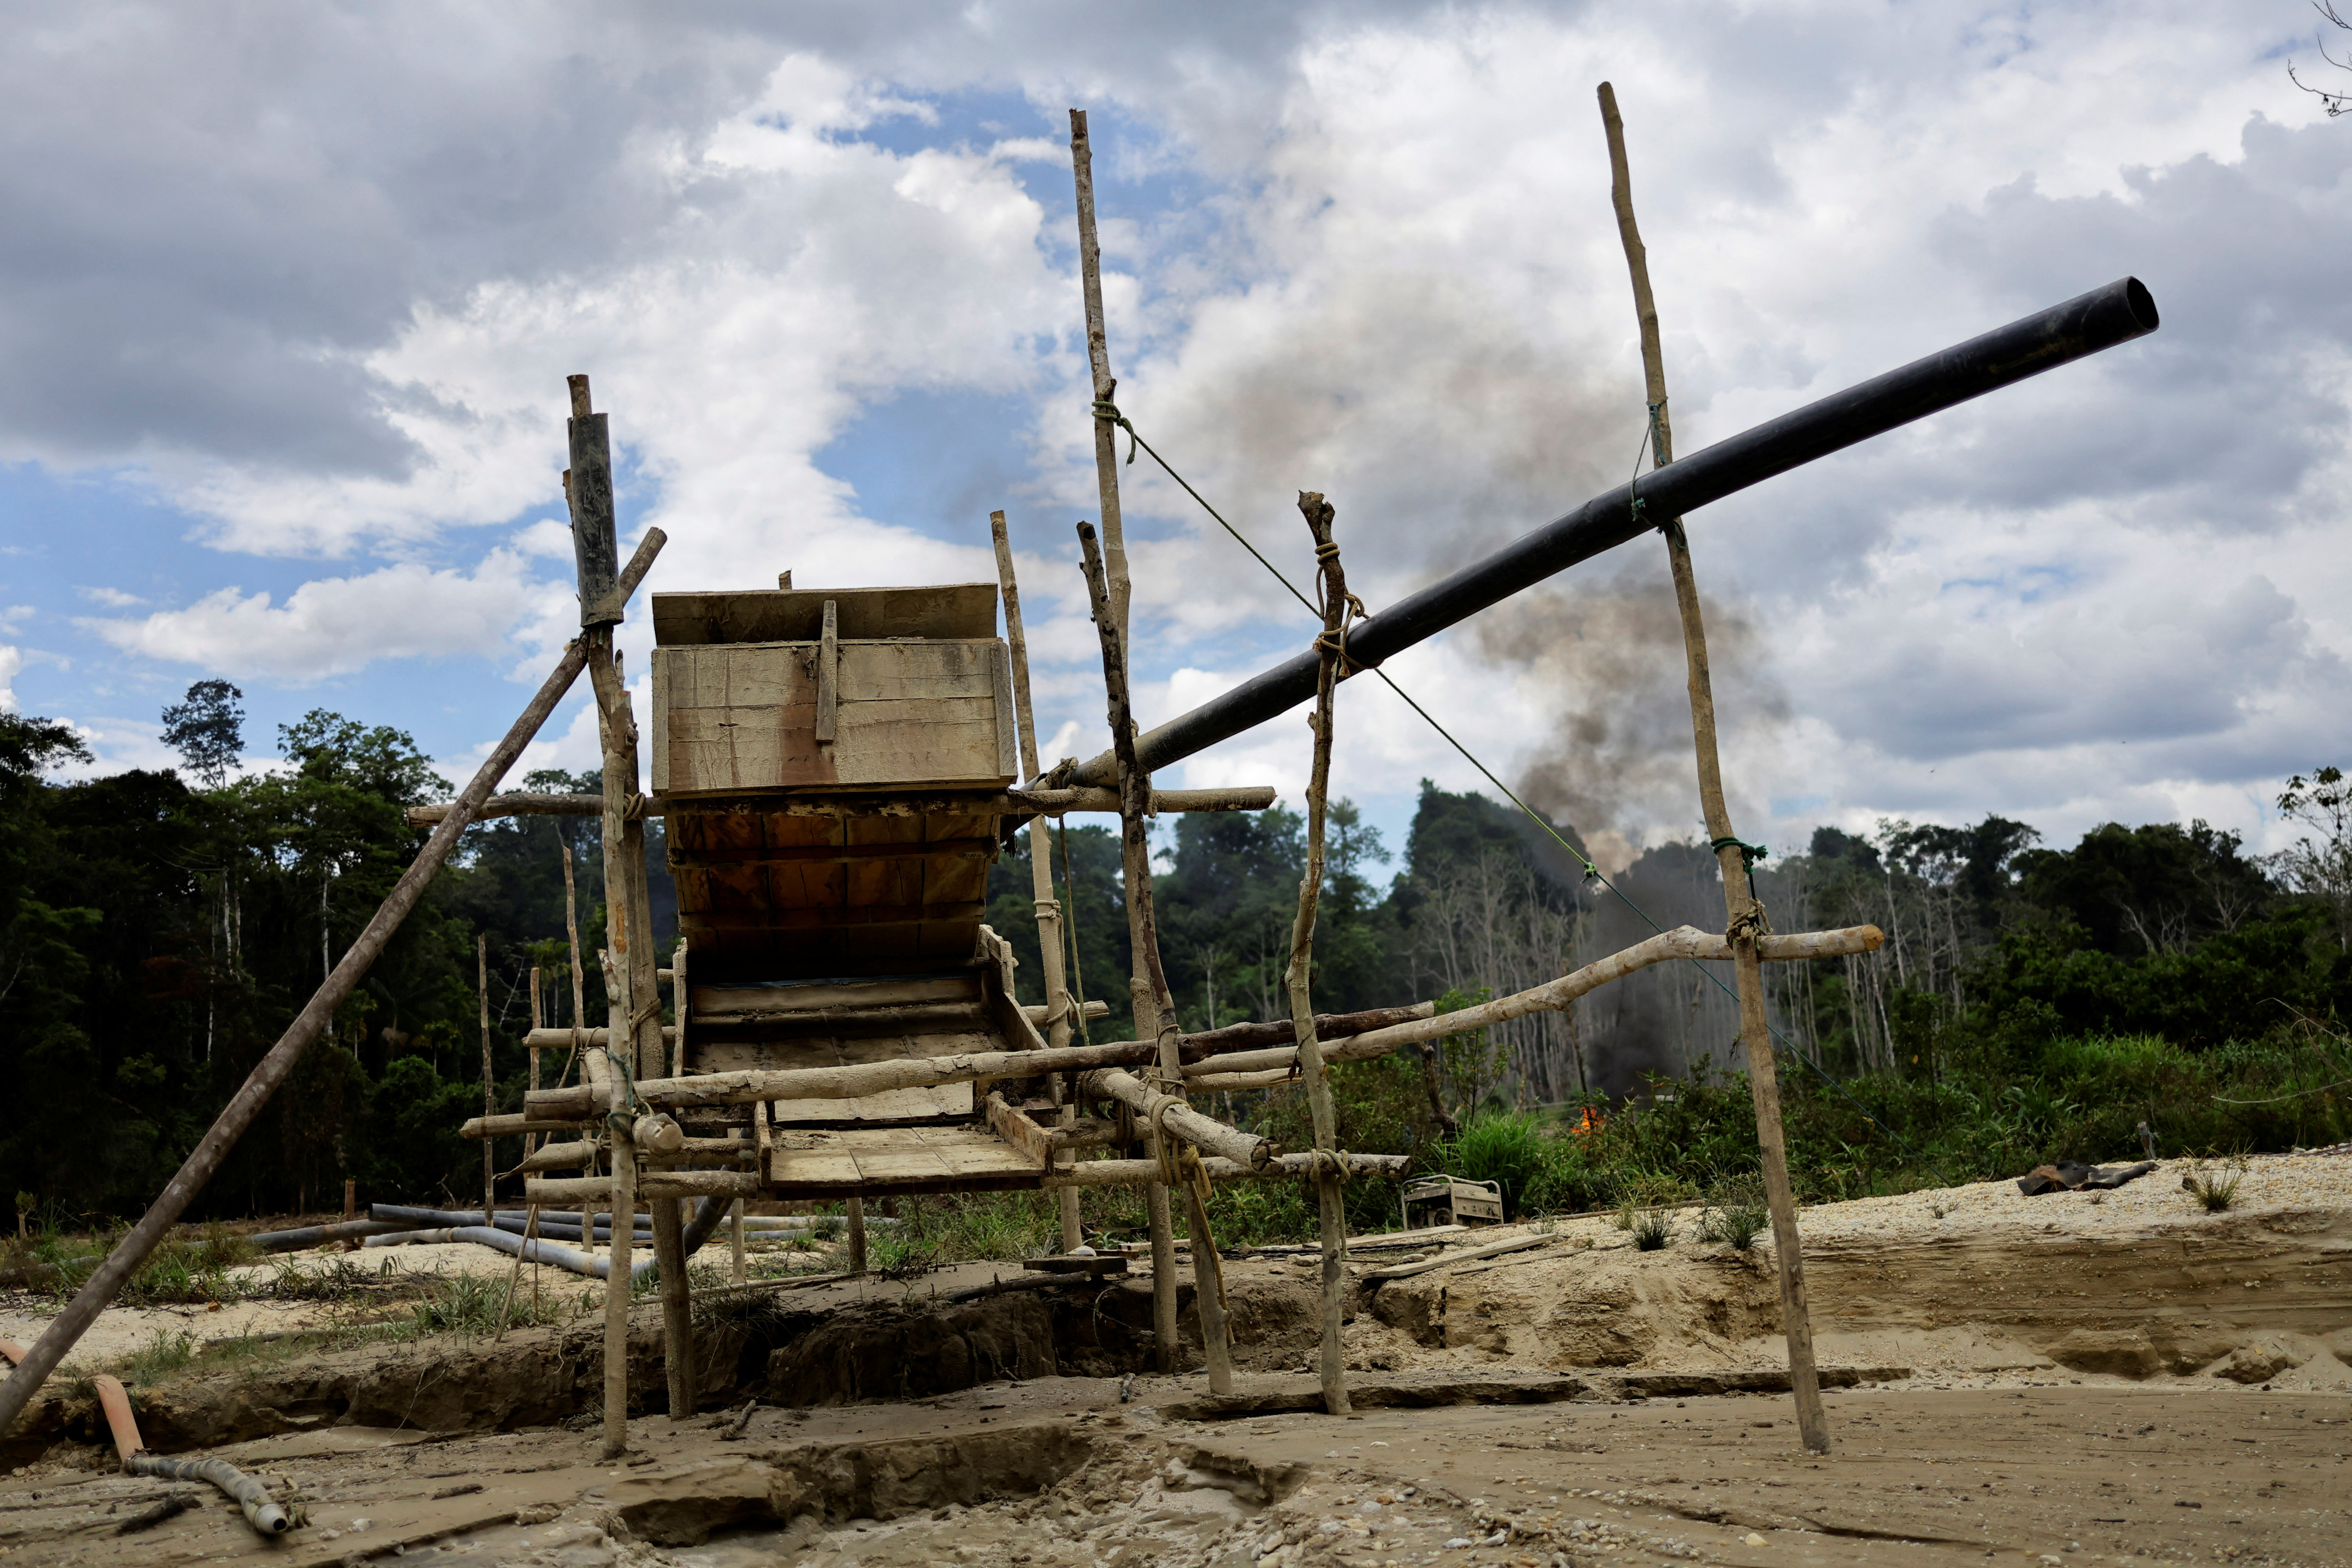 Operation by IBAMA against illegal mining in Yanomami Indigenous land